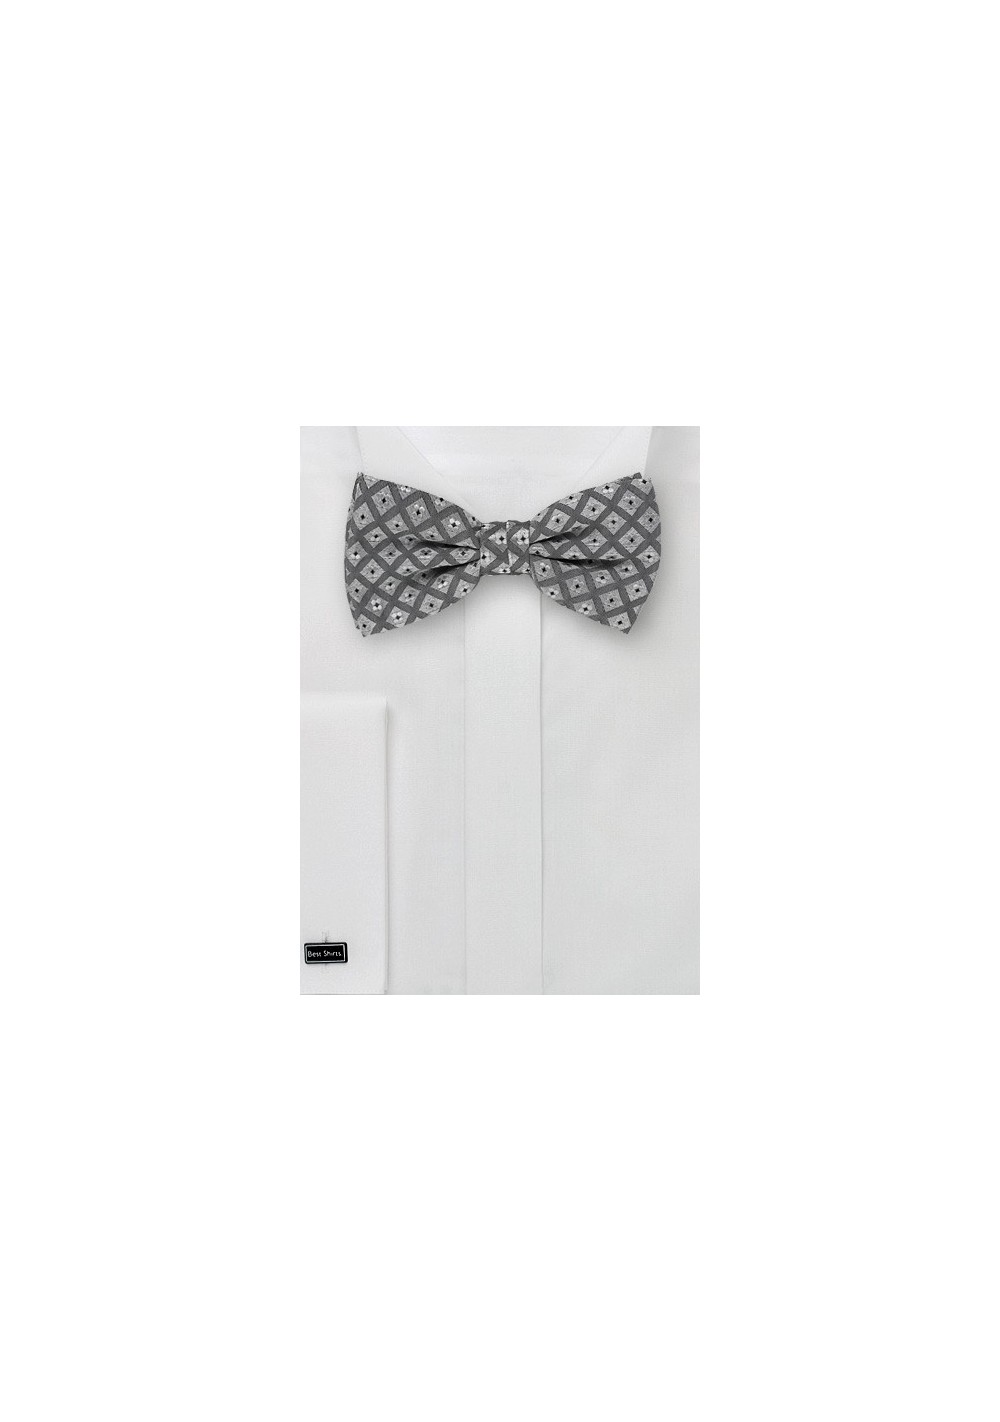 Patterned Bow Ties - Bow Tie Set With Matching Pocket Square